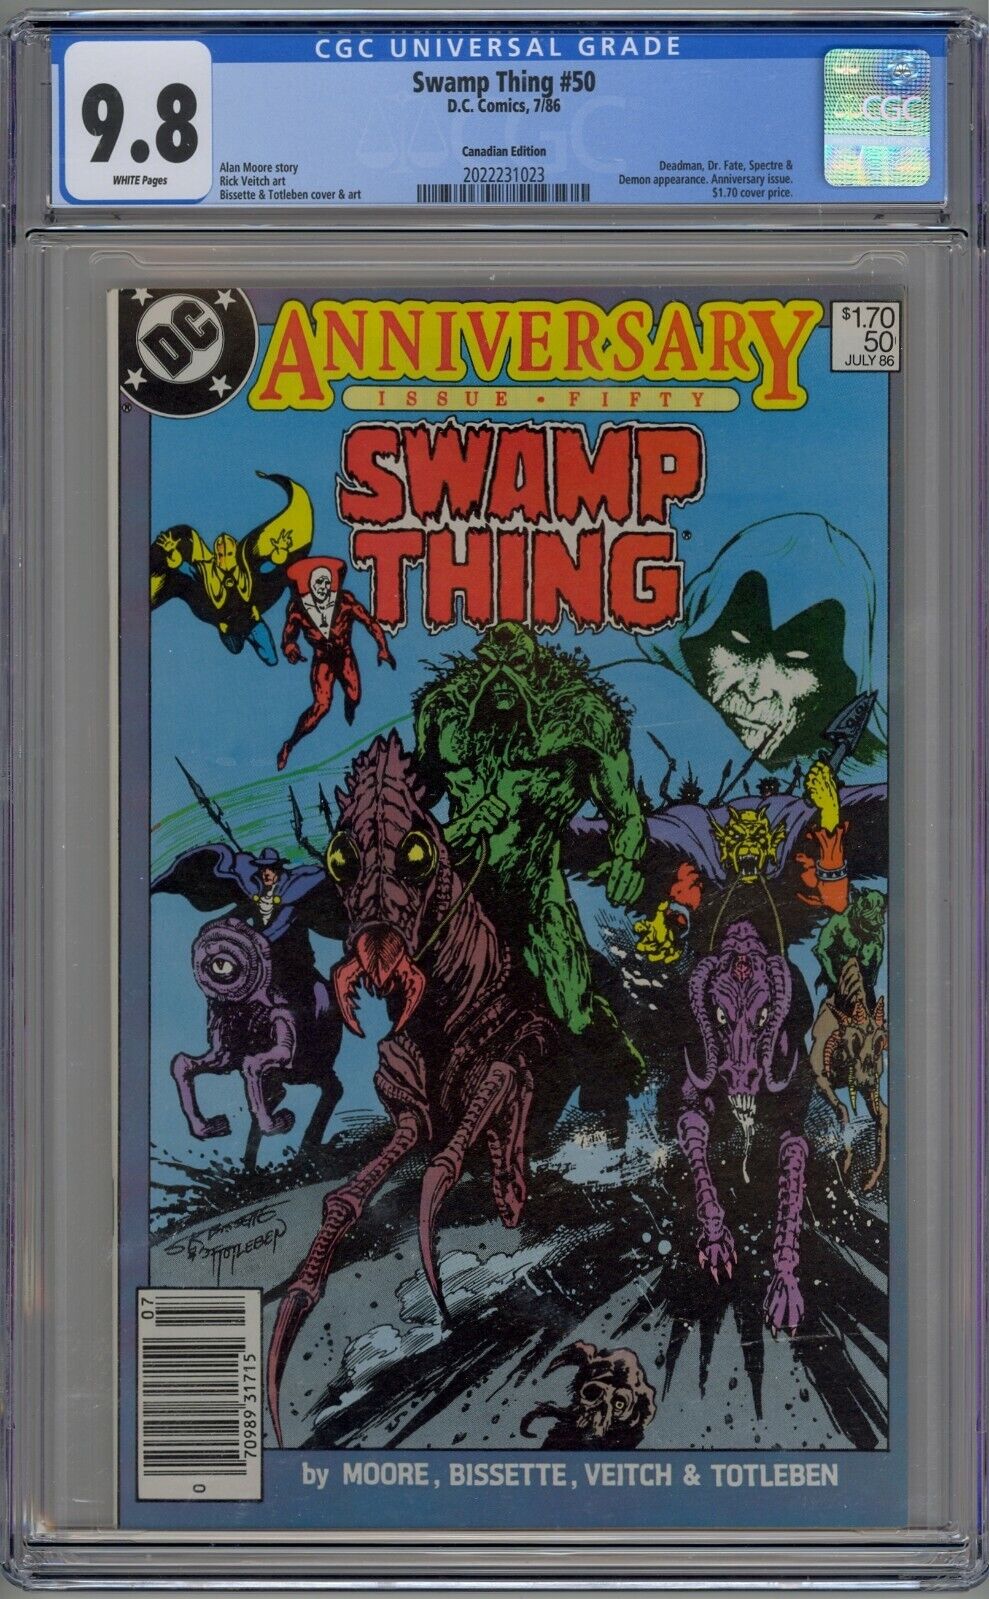 Swamp Thing #50 CGC 9.8 NM/MT Wp 1st Justice League Dark 1 of 2 Canadian Edition